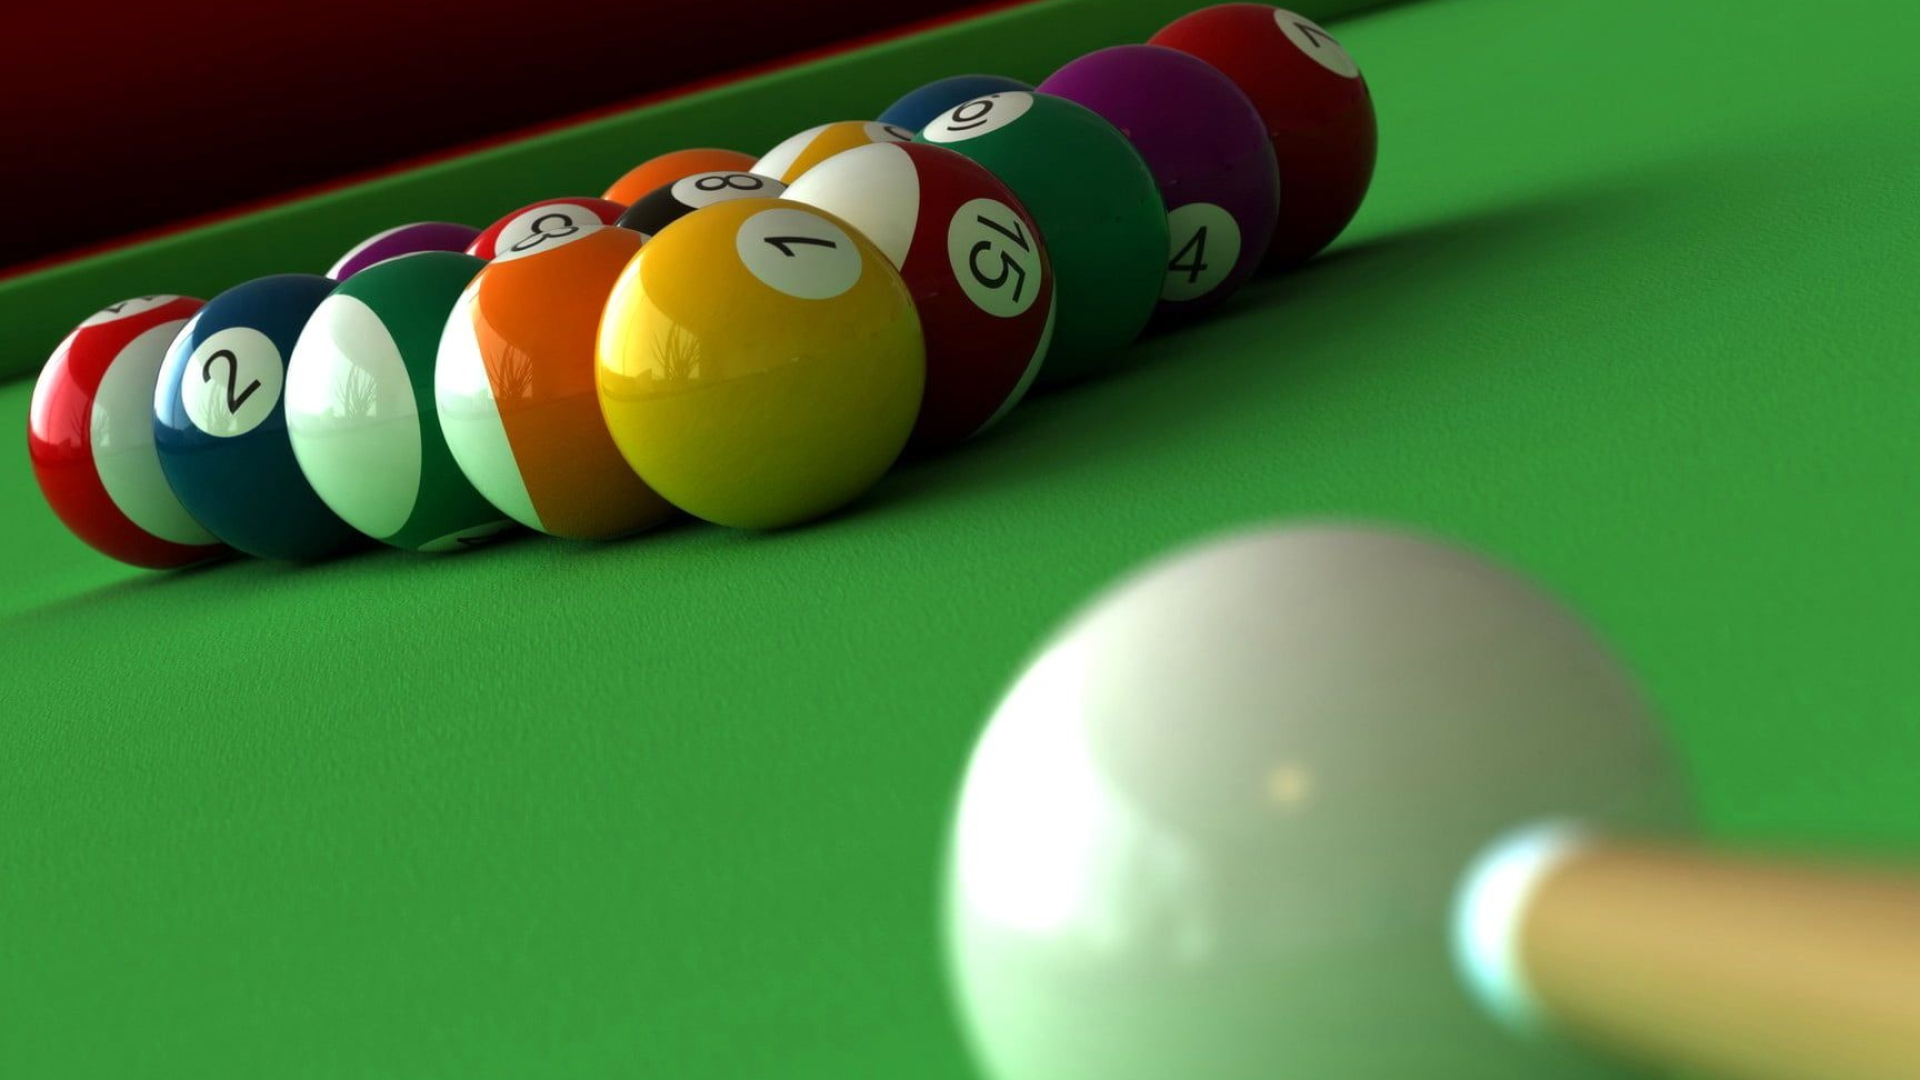 Cue Sports: Preparation for a break shot - the starting point of an eight-ball game. 1920x1080 Full HD Background.